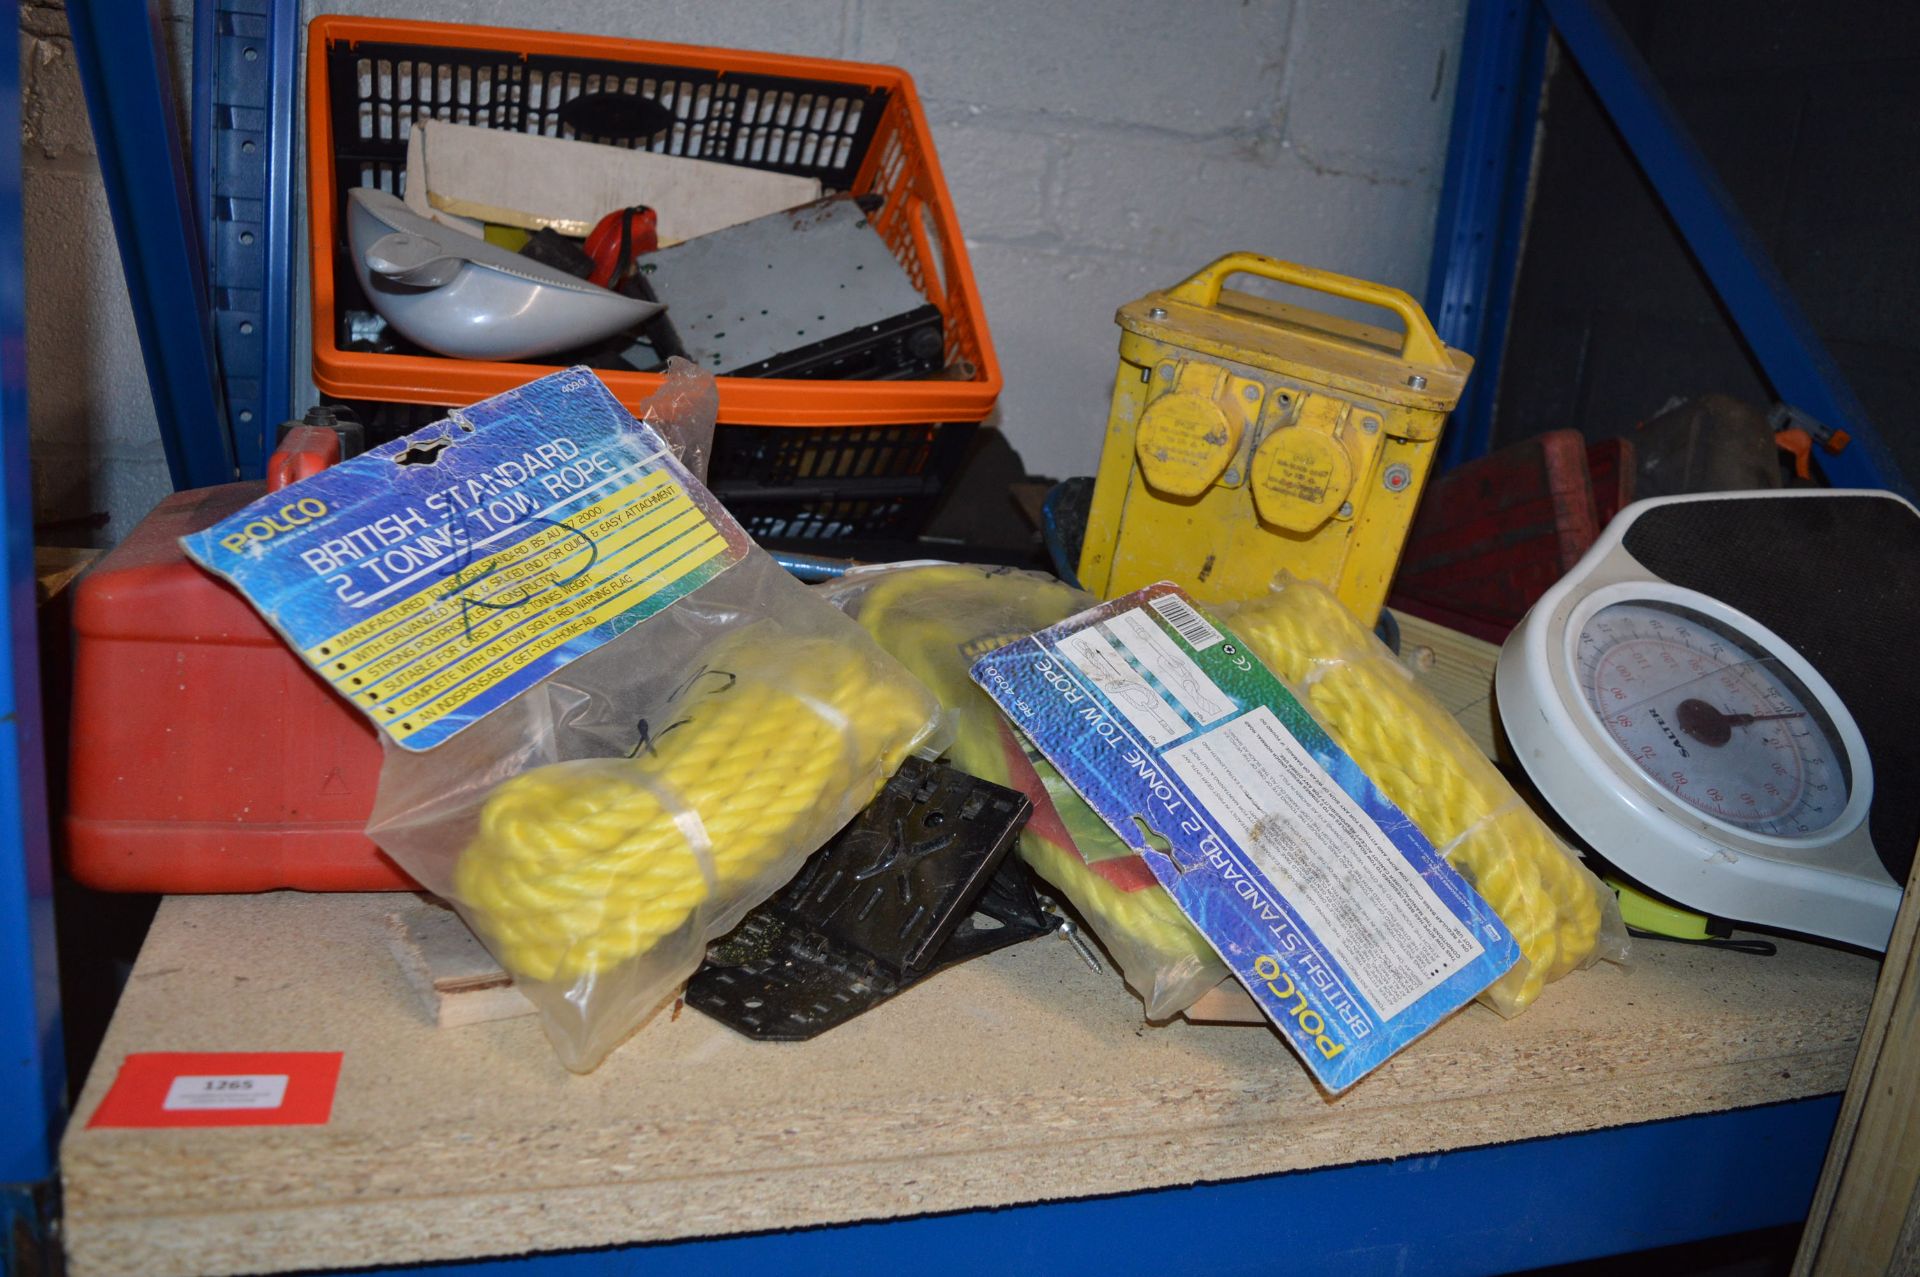 Contents of Shelf to Include Three 2-ton Tow Ropes, 110v Transformer, etc.